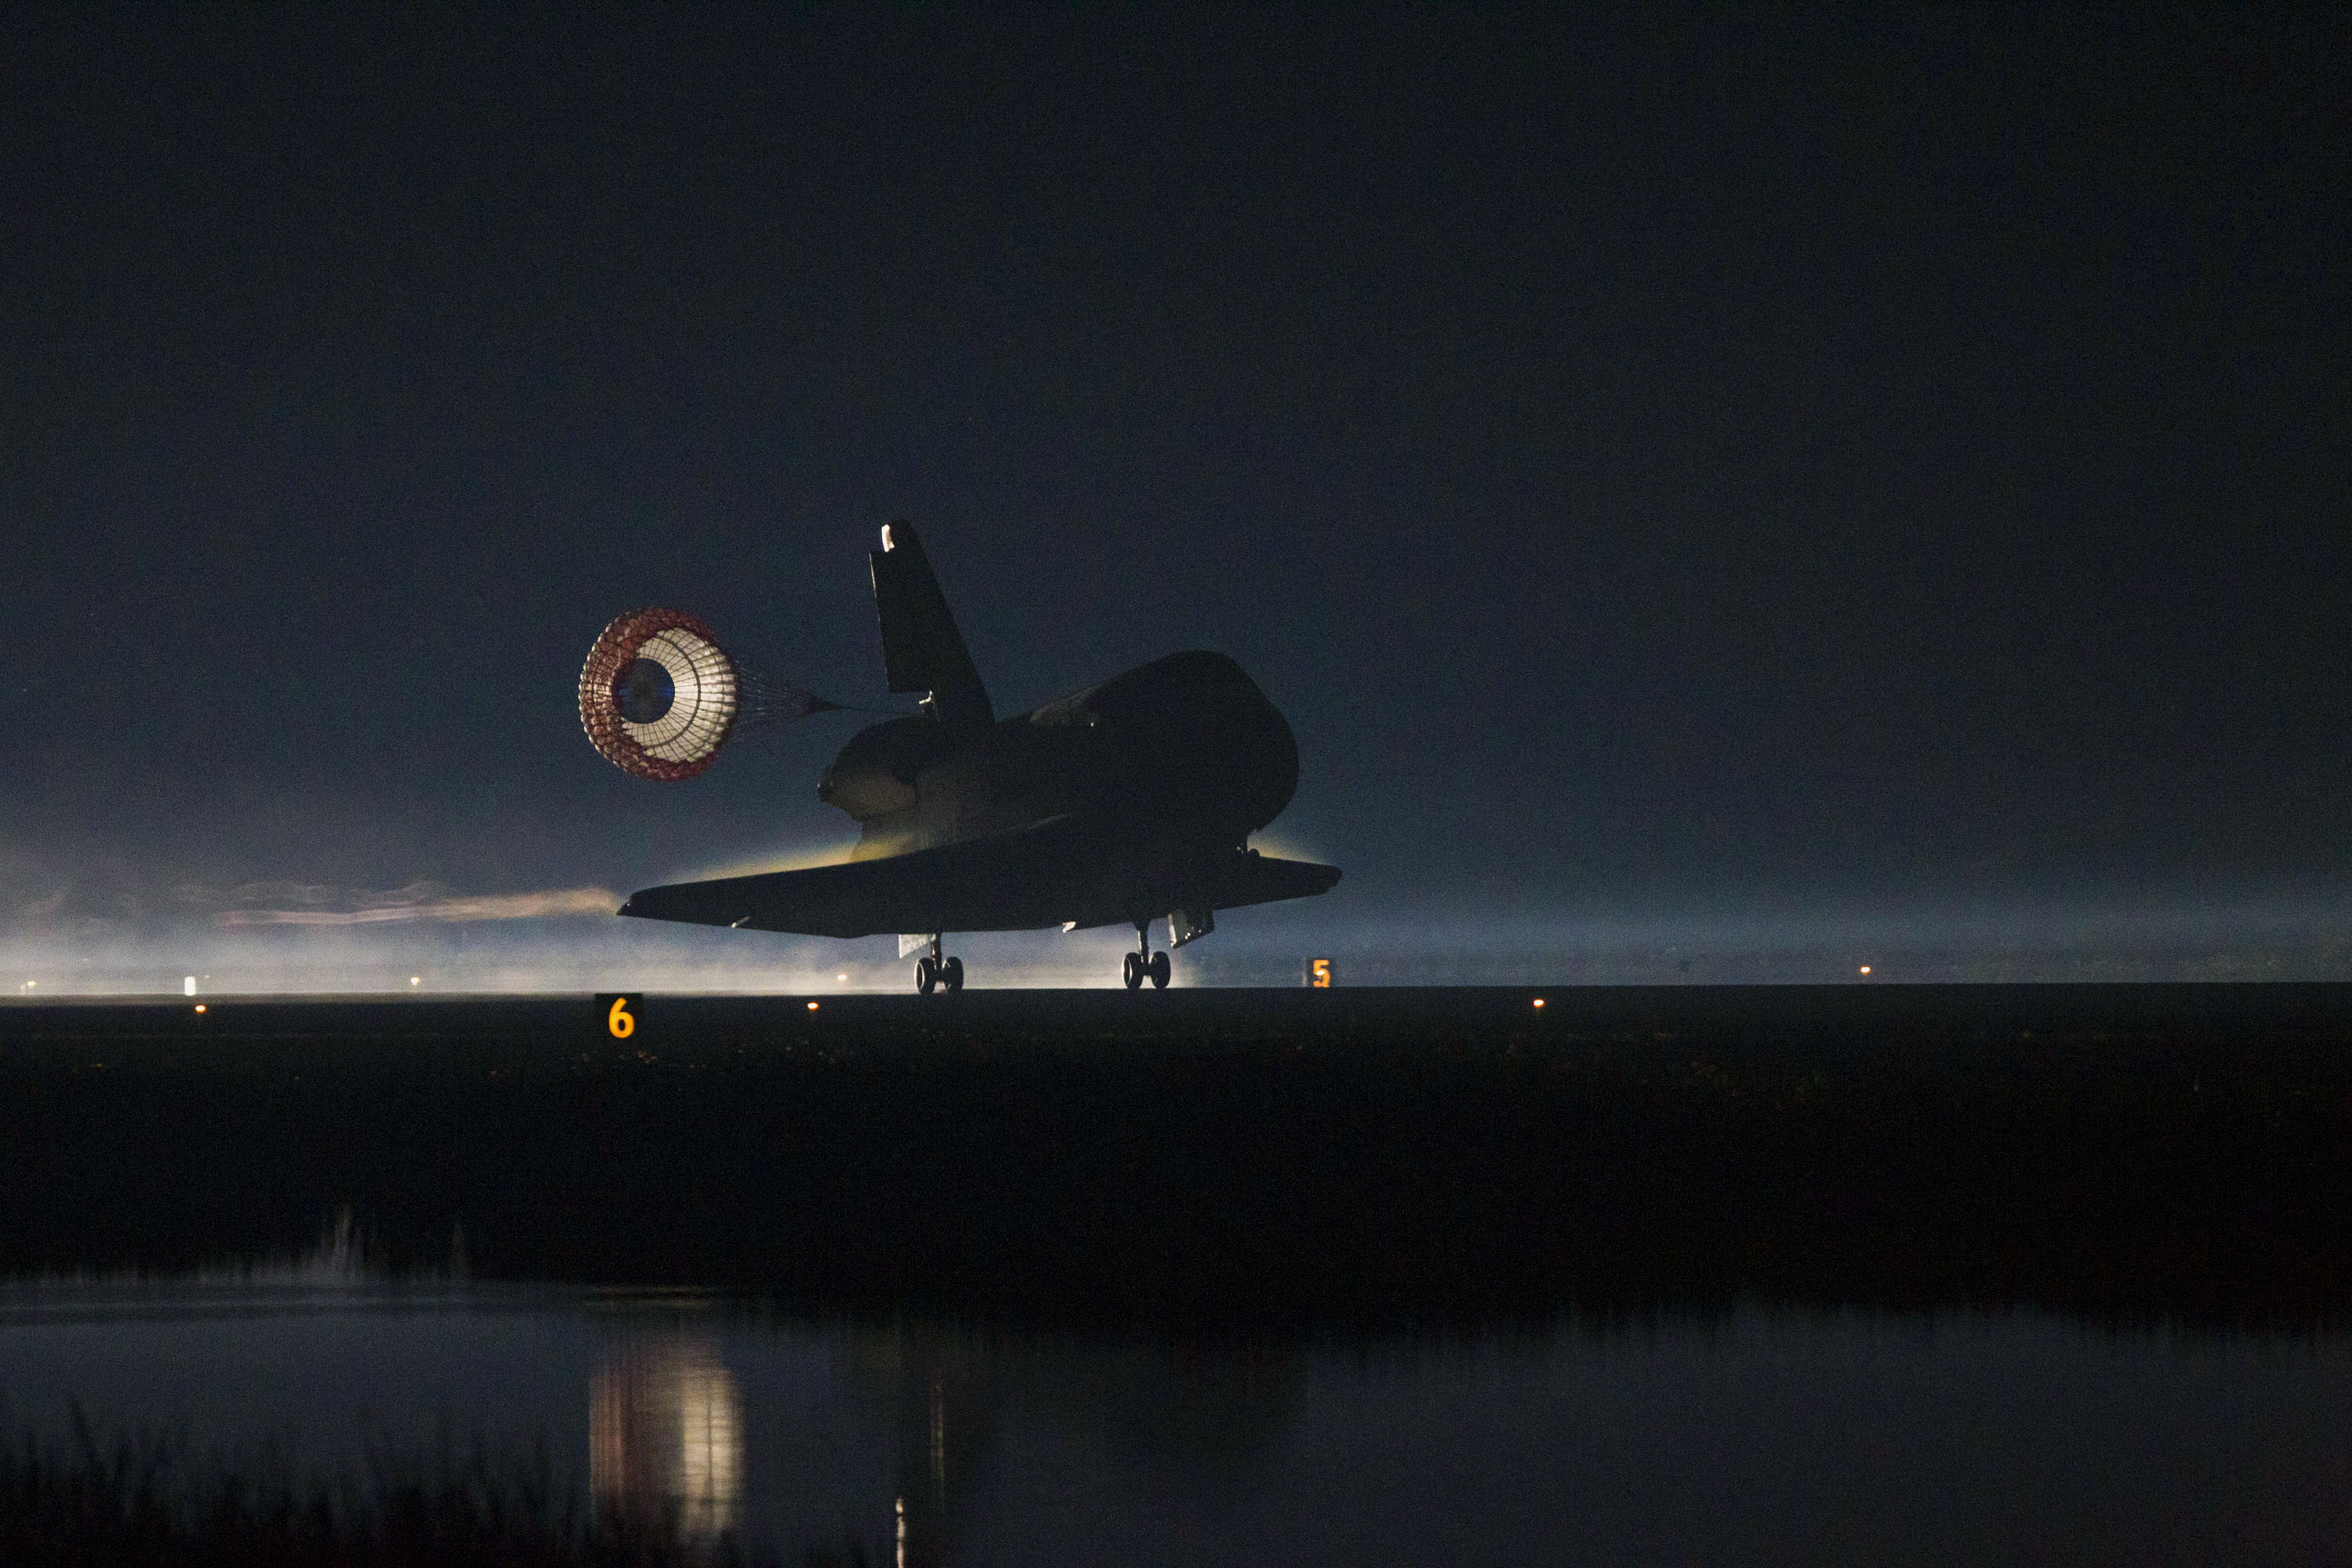 Atlantis alights on Runway 15 at the Shuttle Landing Facility (SLF) at the Kennedy Space Center (KSC) in Florida at 5:57 a.m. EDT on 21 July 2011, wrapping up a remarkable 33-mission career. Photo Credit: NASA/Kenny Allen